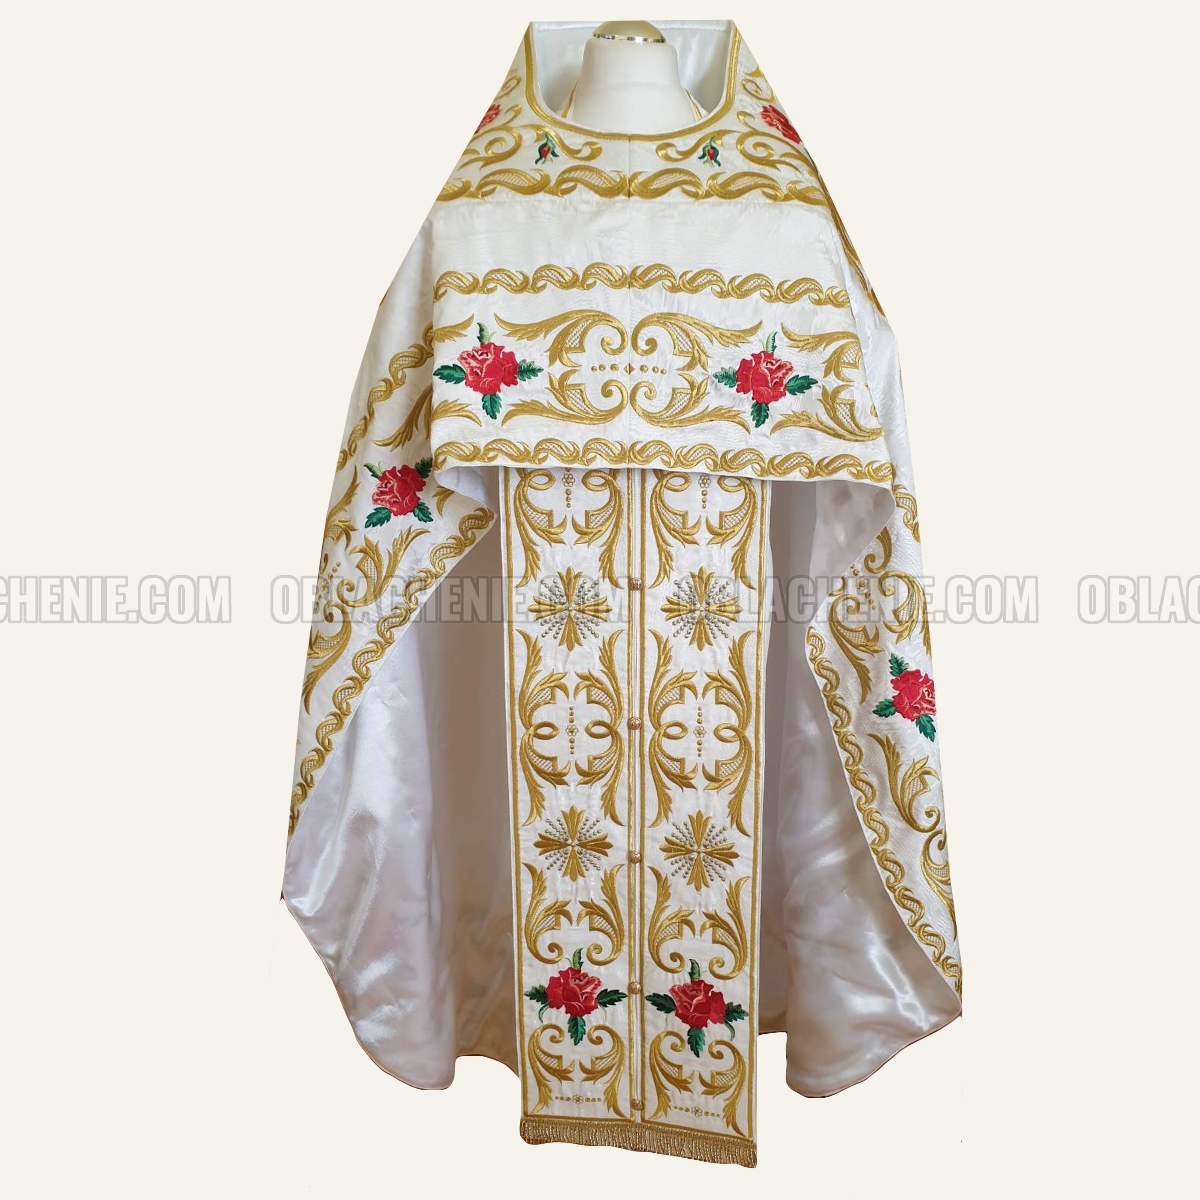 EMBROIDERED PRIEST'S VESTMENTS 10931